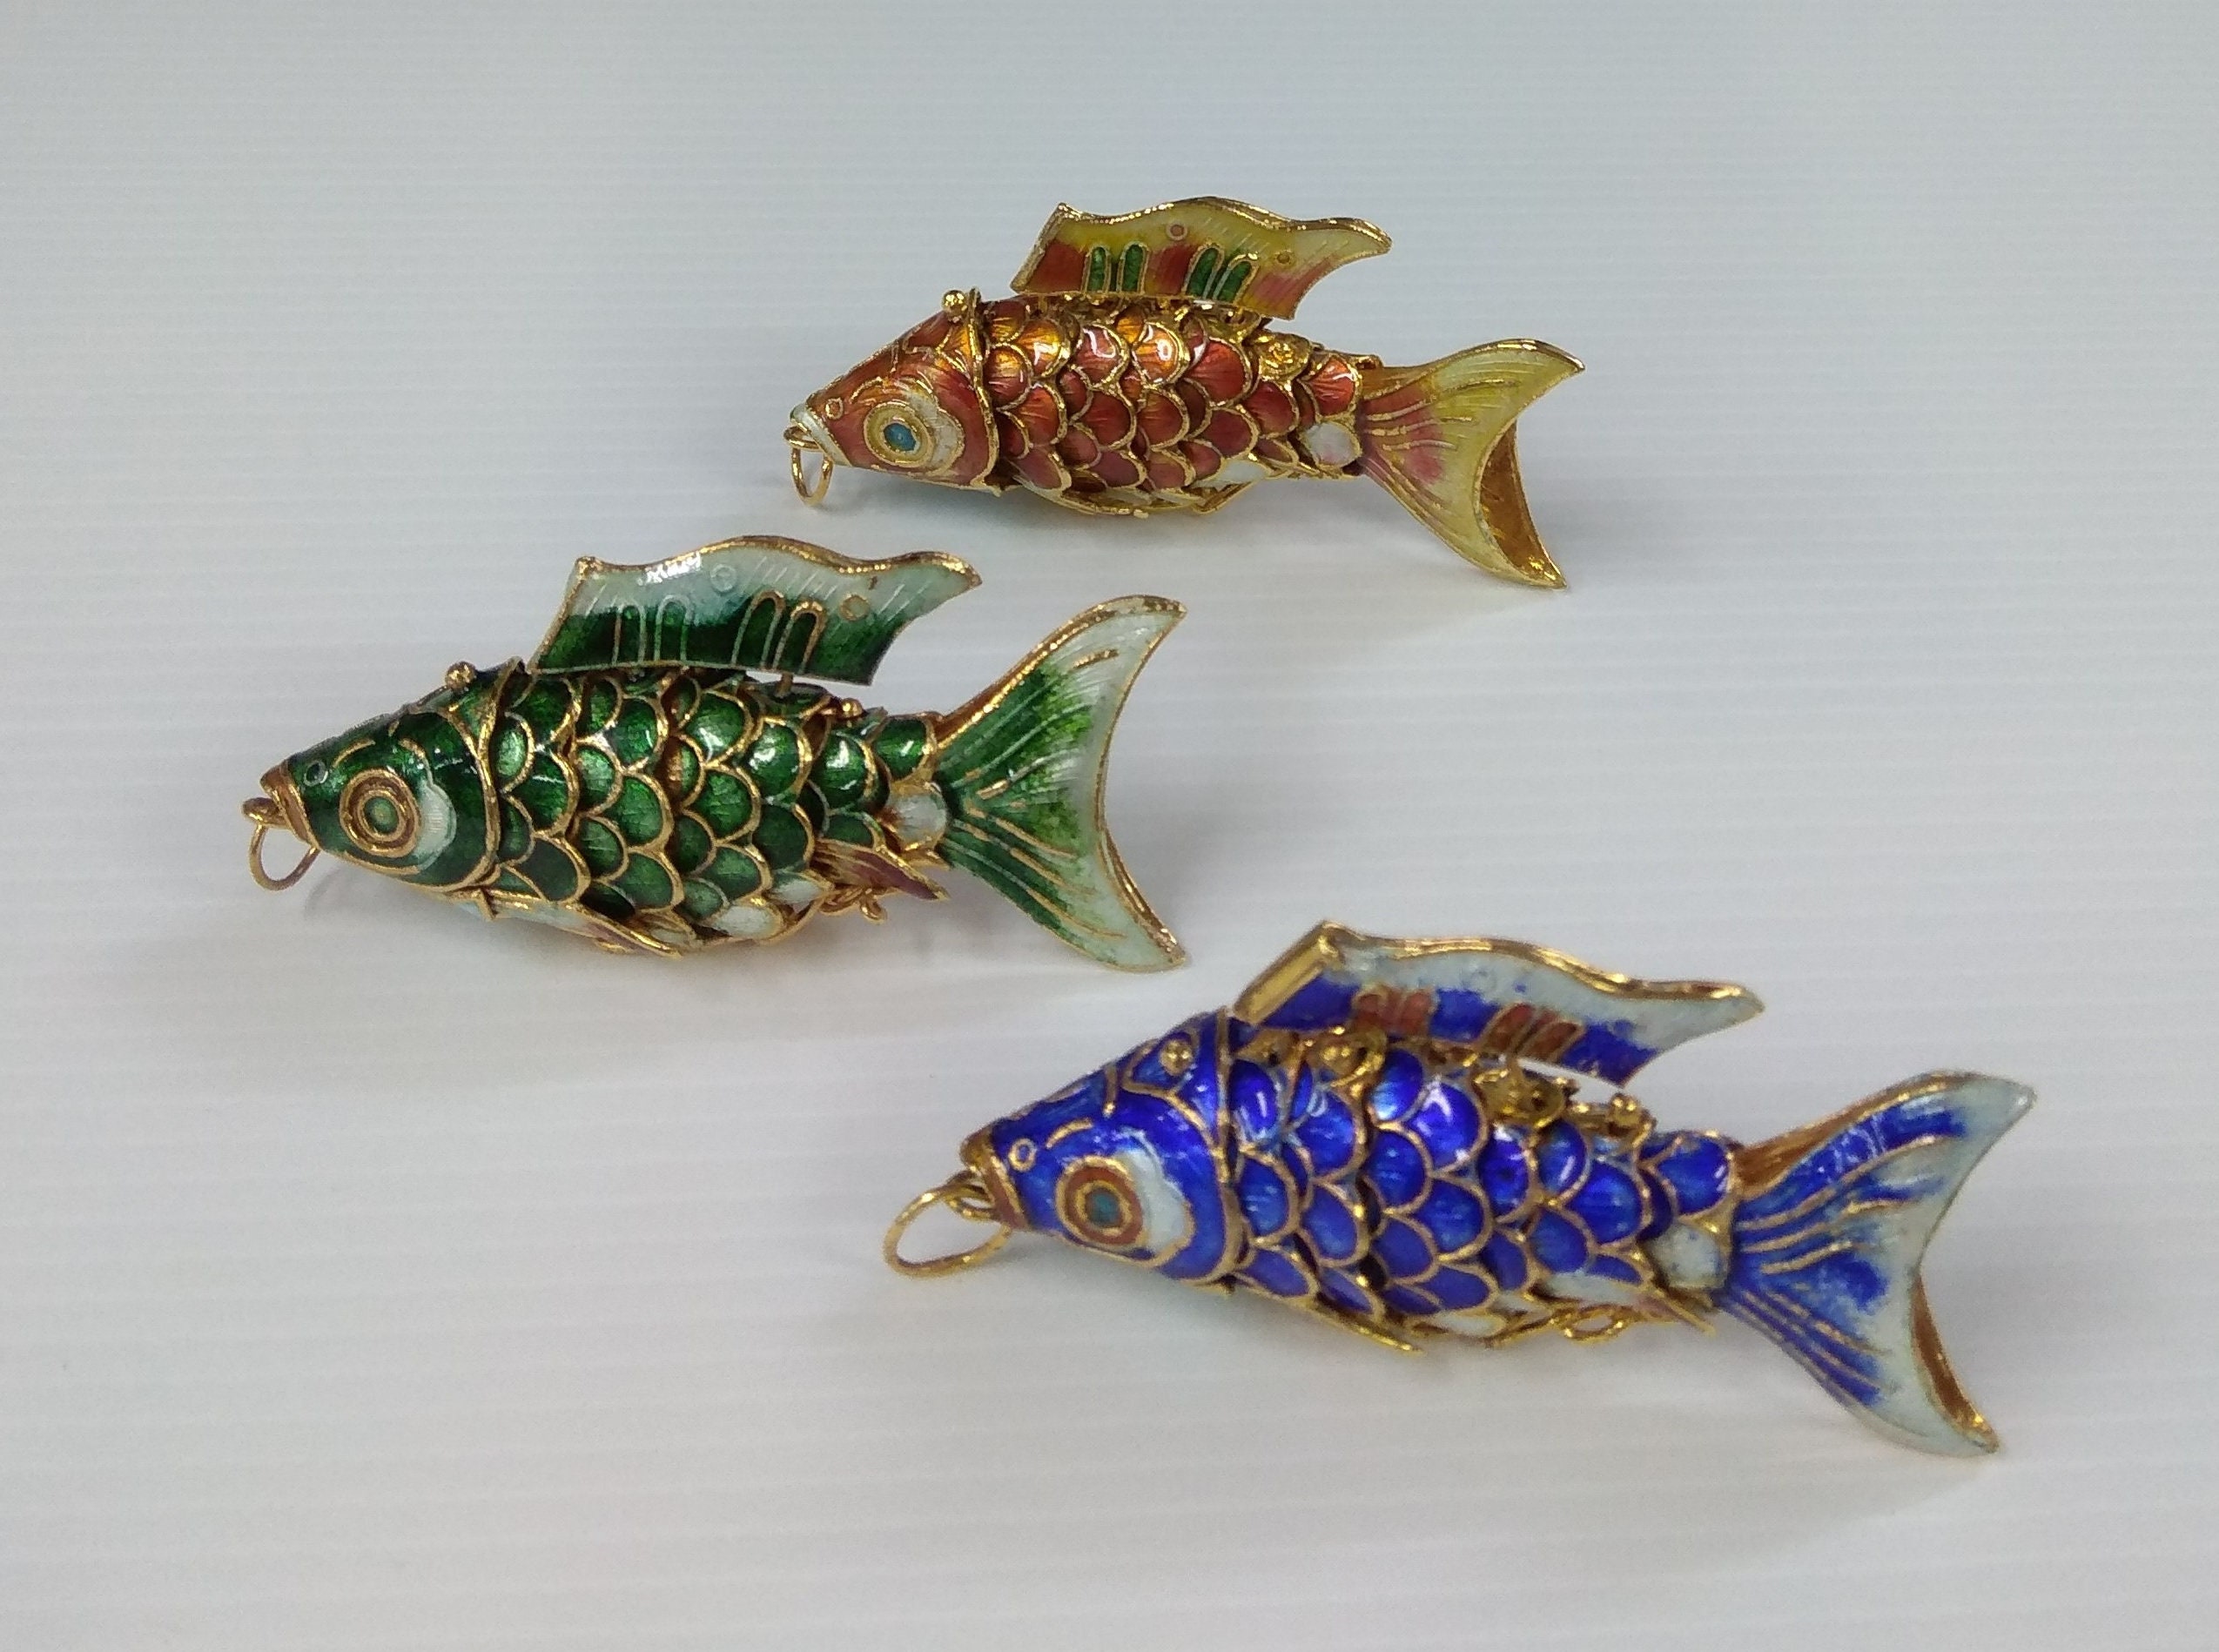 Buy Marlin Pendant, Vintage Articulated Fish Pendant, Gold Fish Pendant,  Fish Charm for Necklace, Fish Necklace, Gift for Her Online in India - Etsy